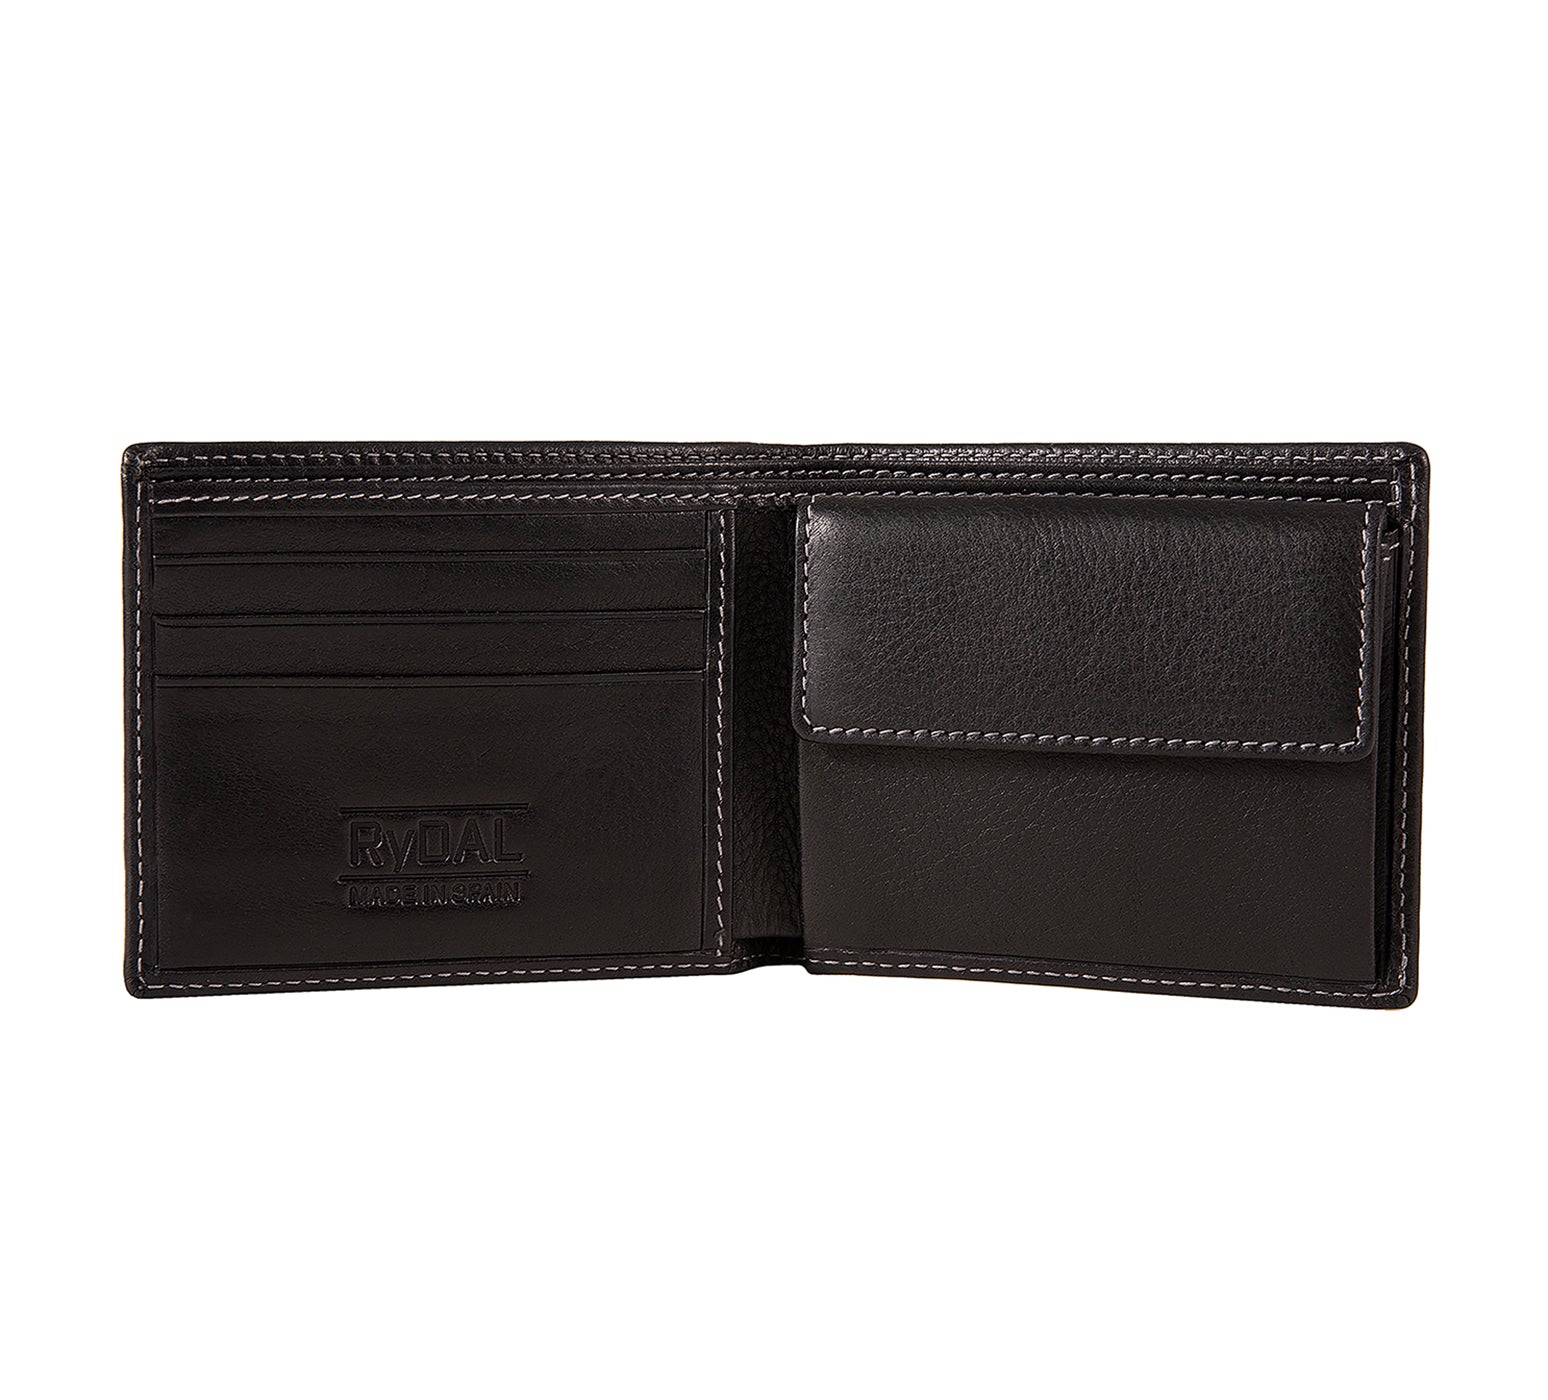 Mens Leather Wallet with Coin Pocket from Rydal in 'Black' showing interior.